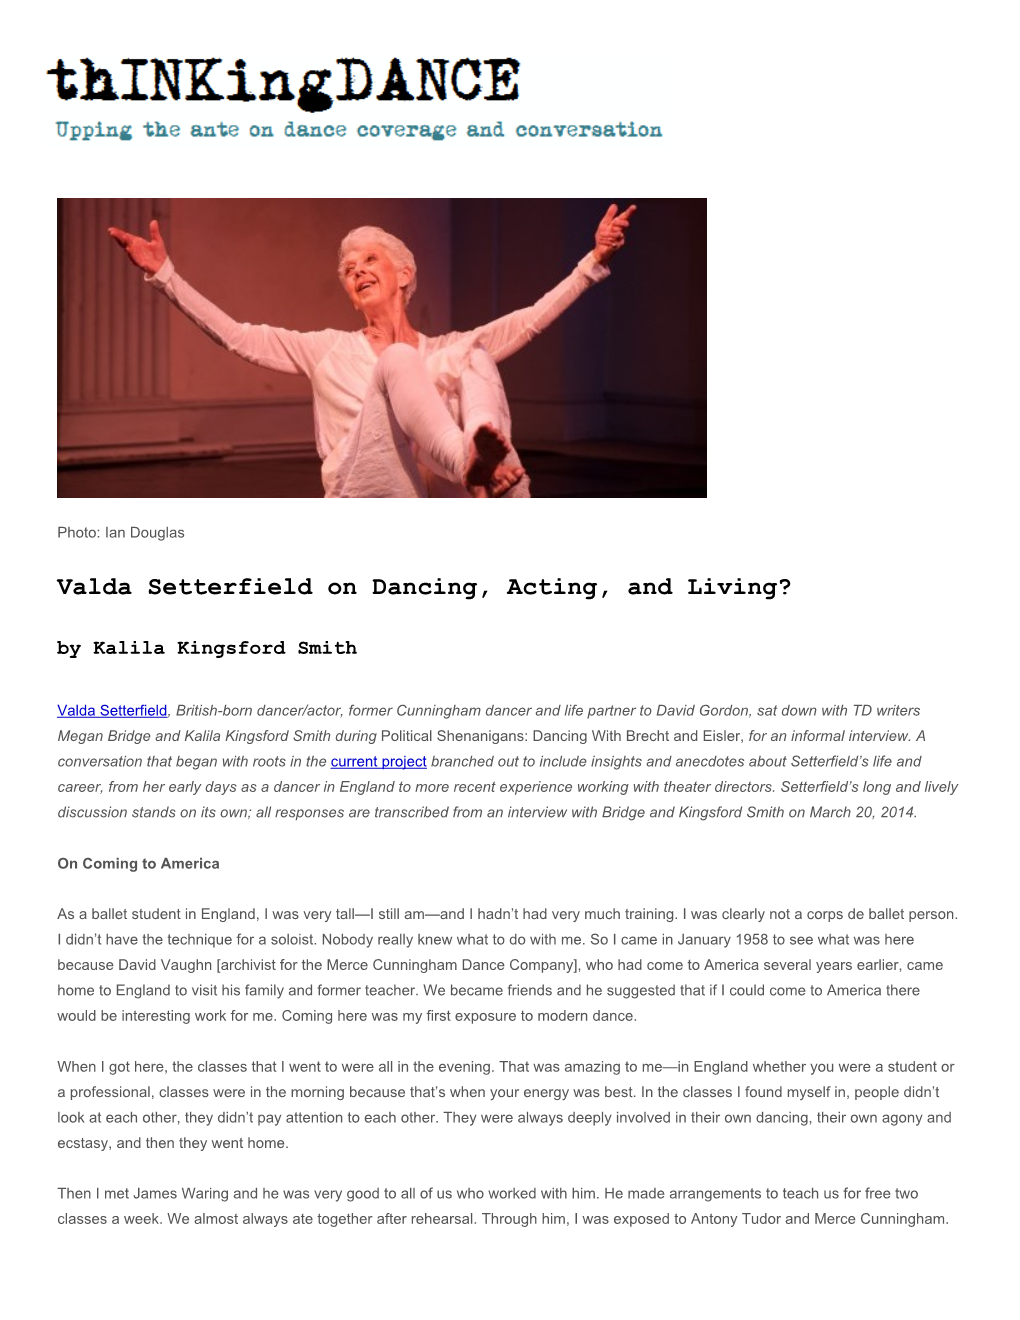 Valda Setterfield on Dancing, Acting, and Living? by Kalila Kingsford Smith